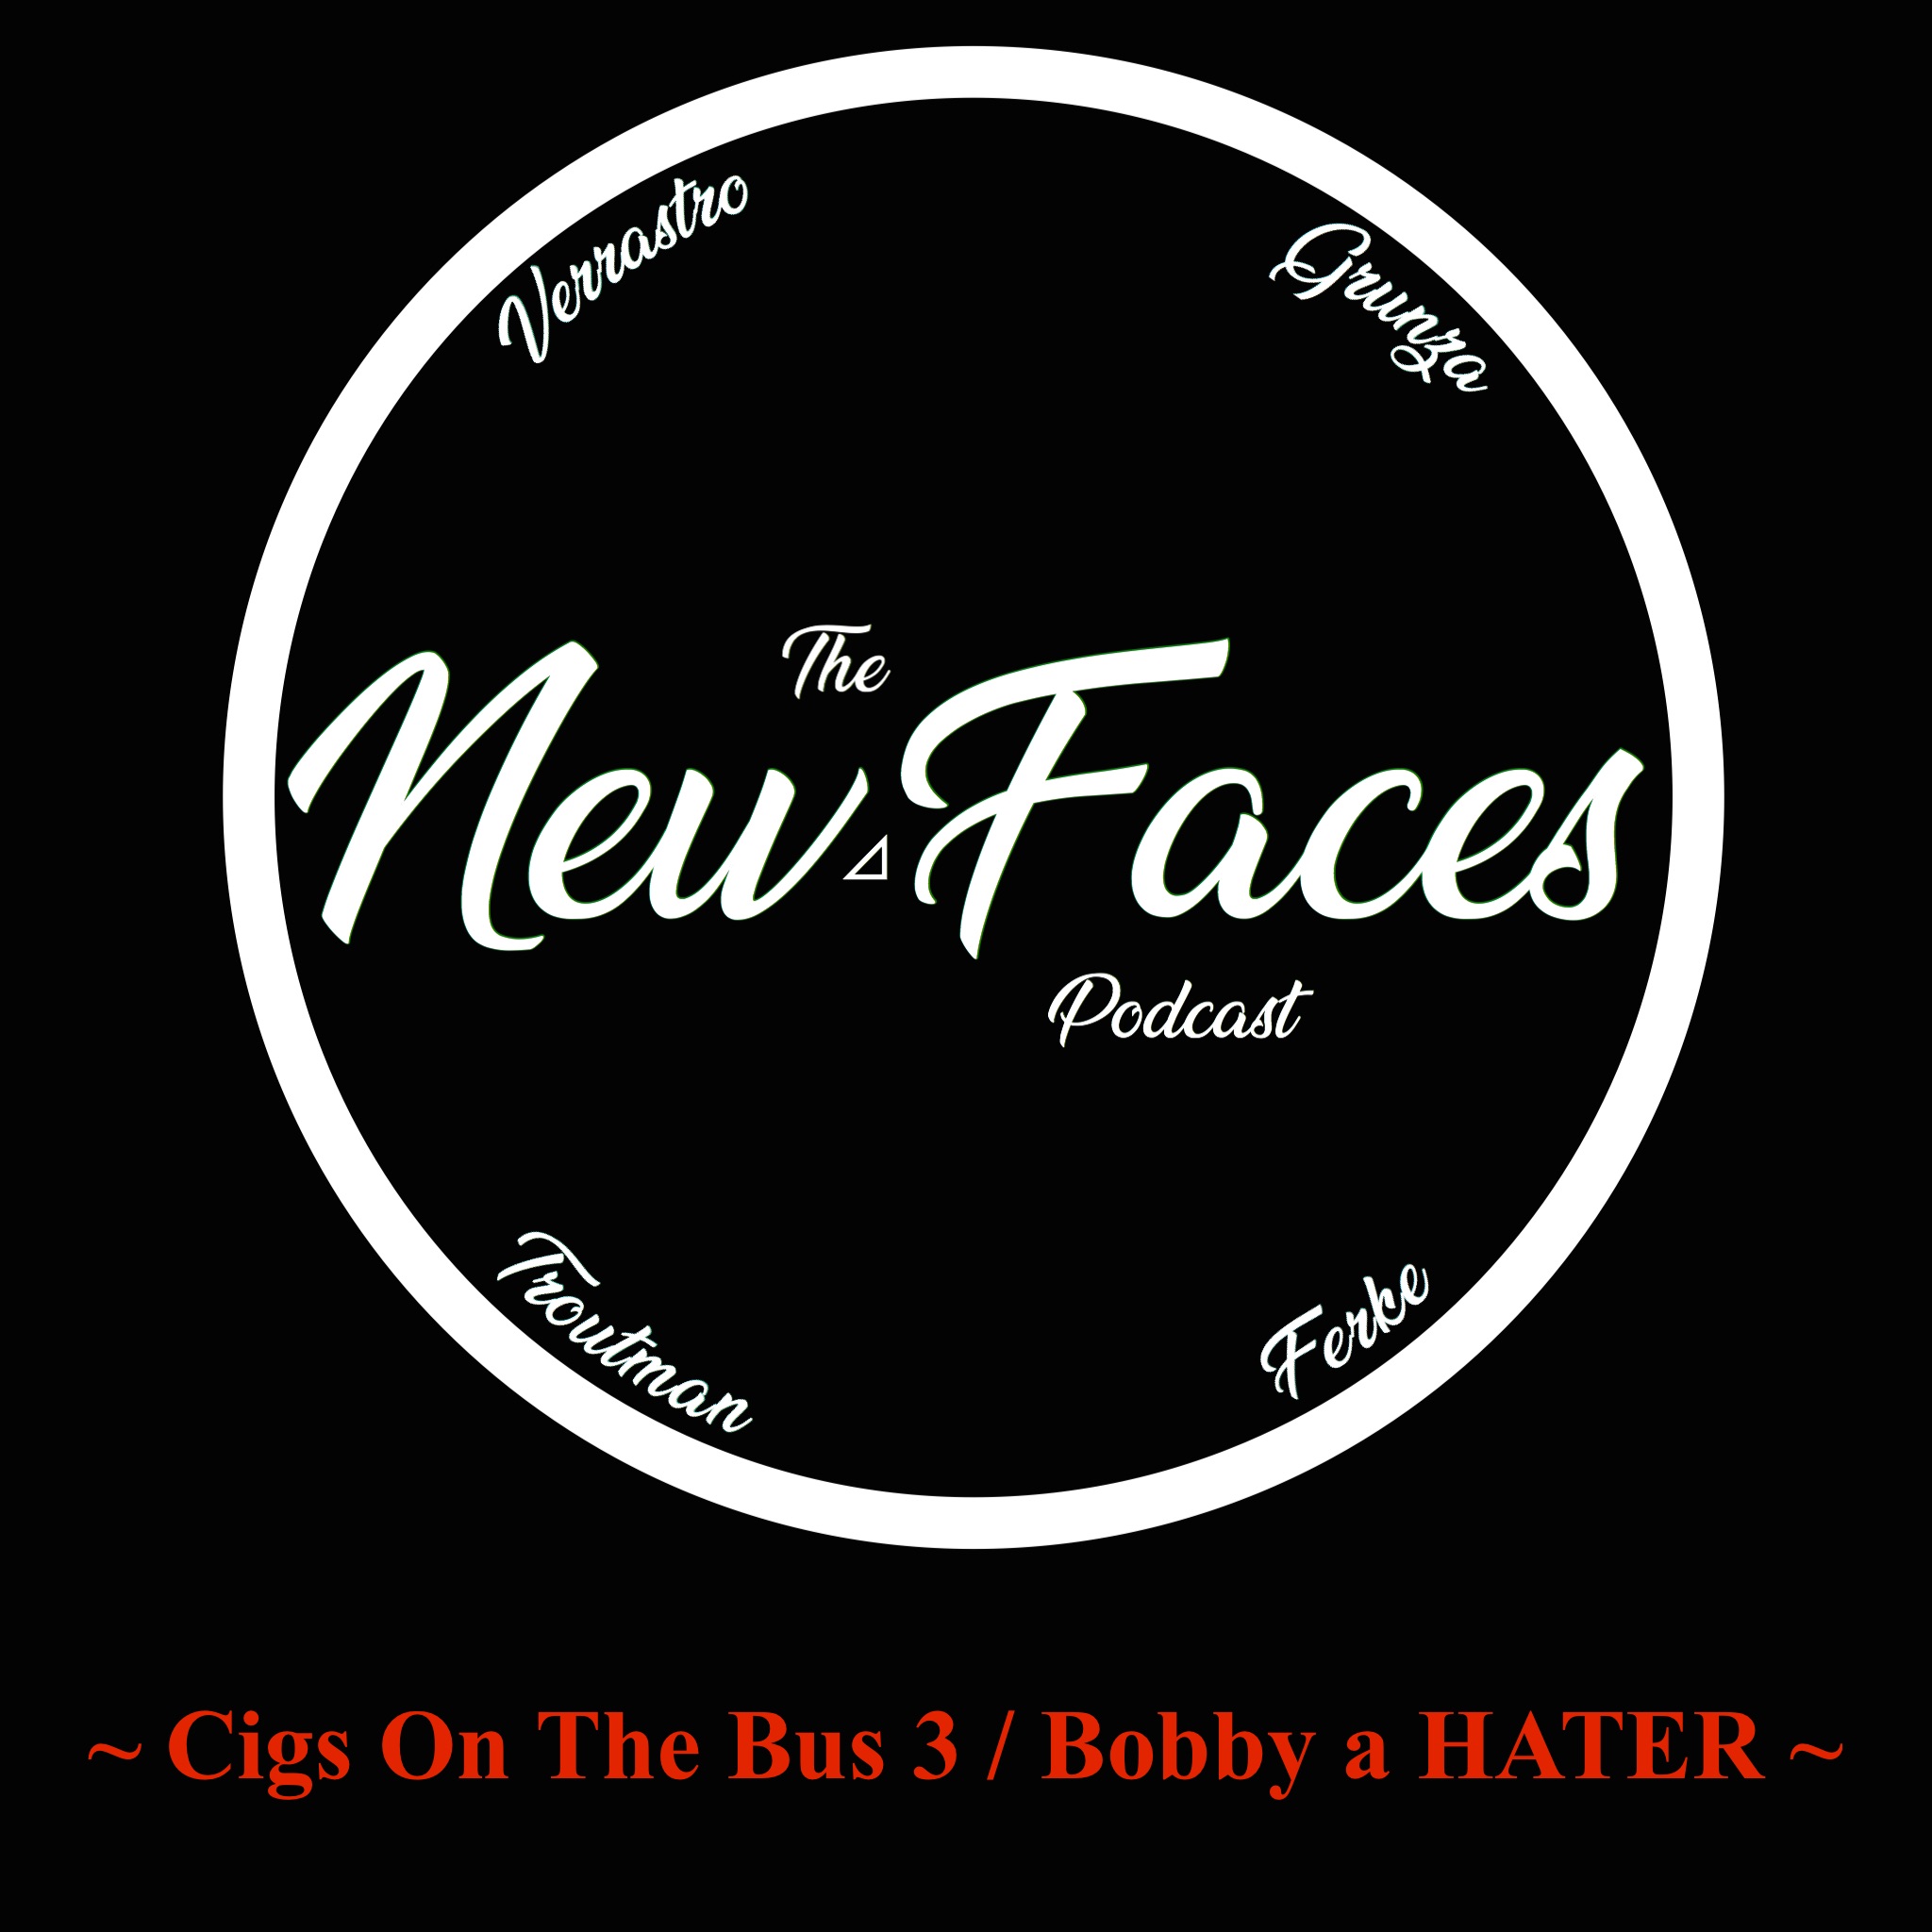 Cigs On The Bus 3 / Bobby's a HATER (Ep.28)